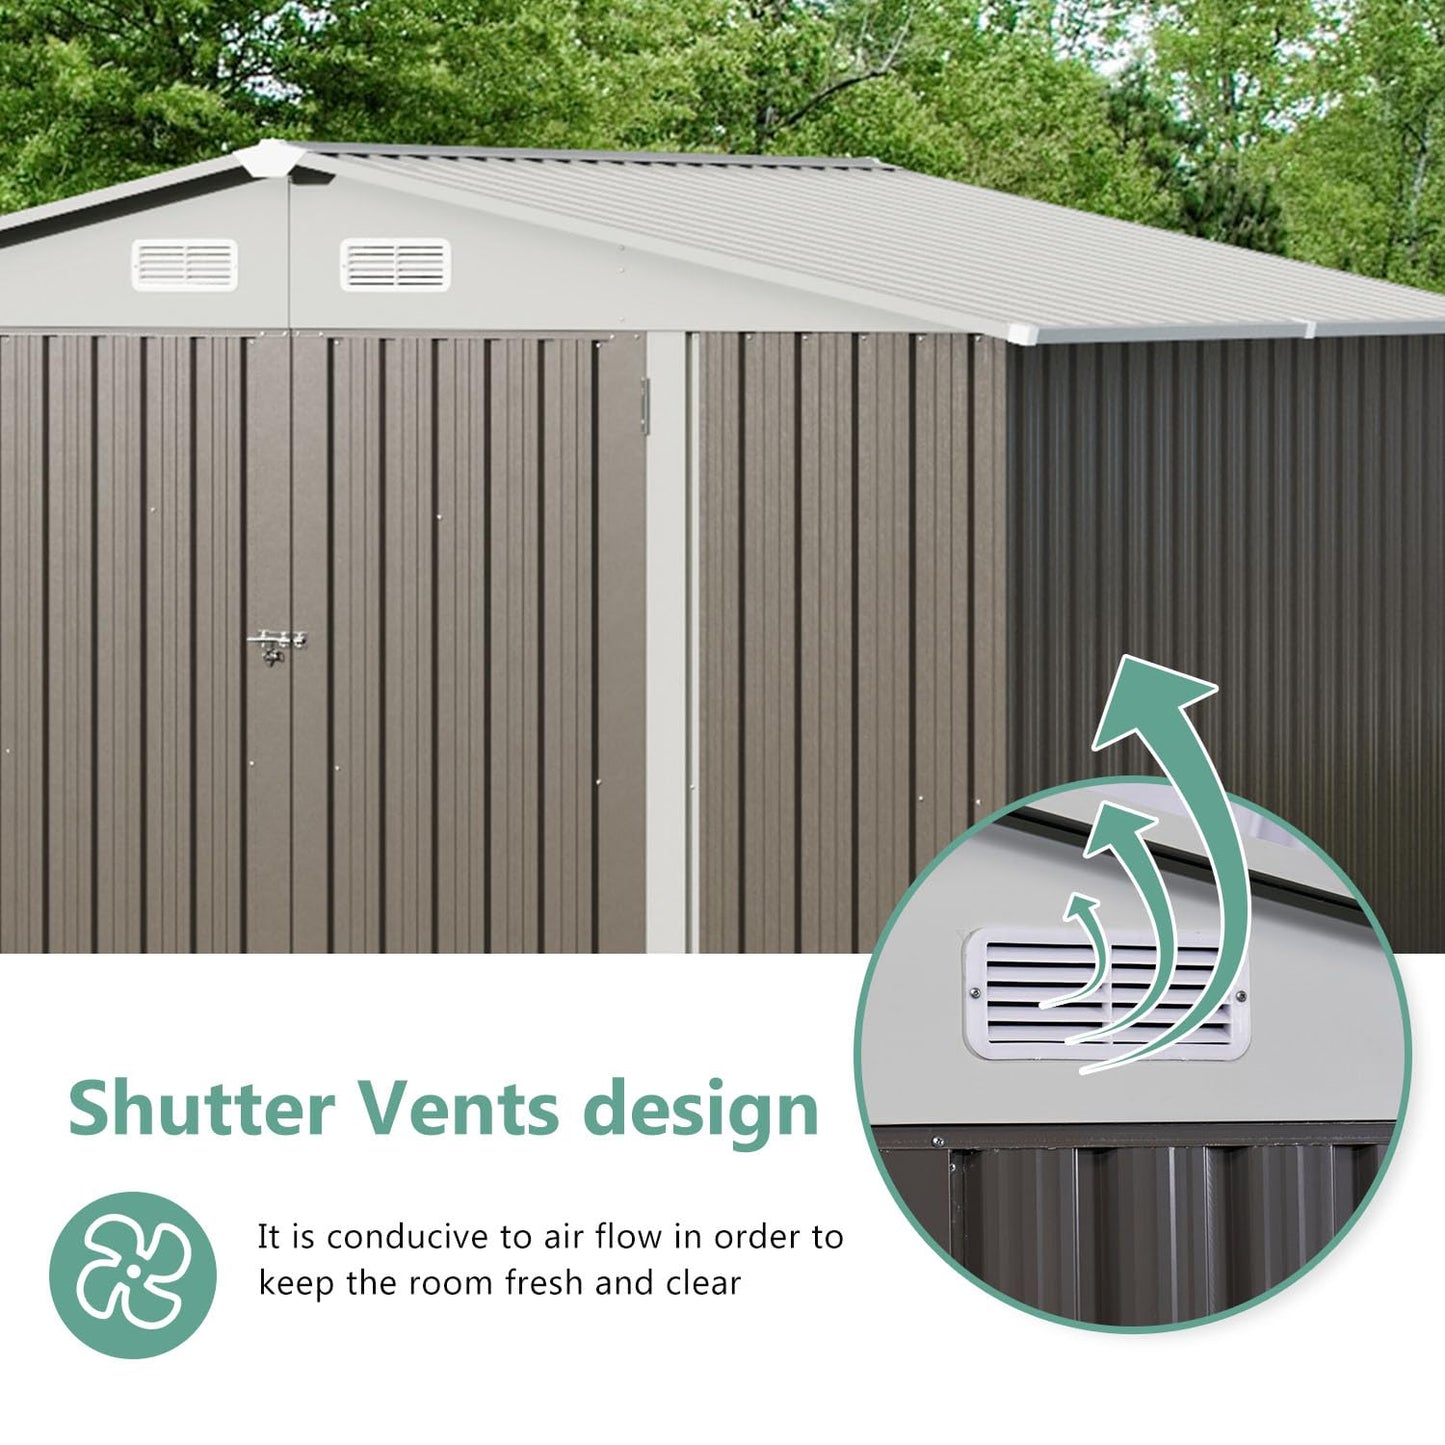 Aoxun 9.6’x7.8’ Outdoor Metal Storage Shed, Steel Utility Tool Shed Storage with Lockable Doors, Metal Sheds Outdoor Storage for Garden, Backyard, Lawn and Patio, Grey